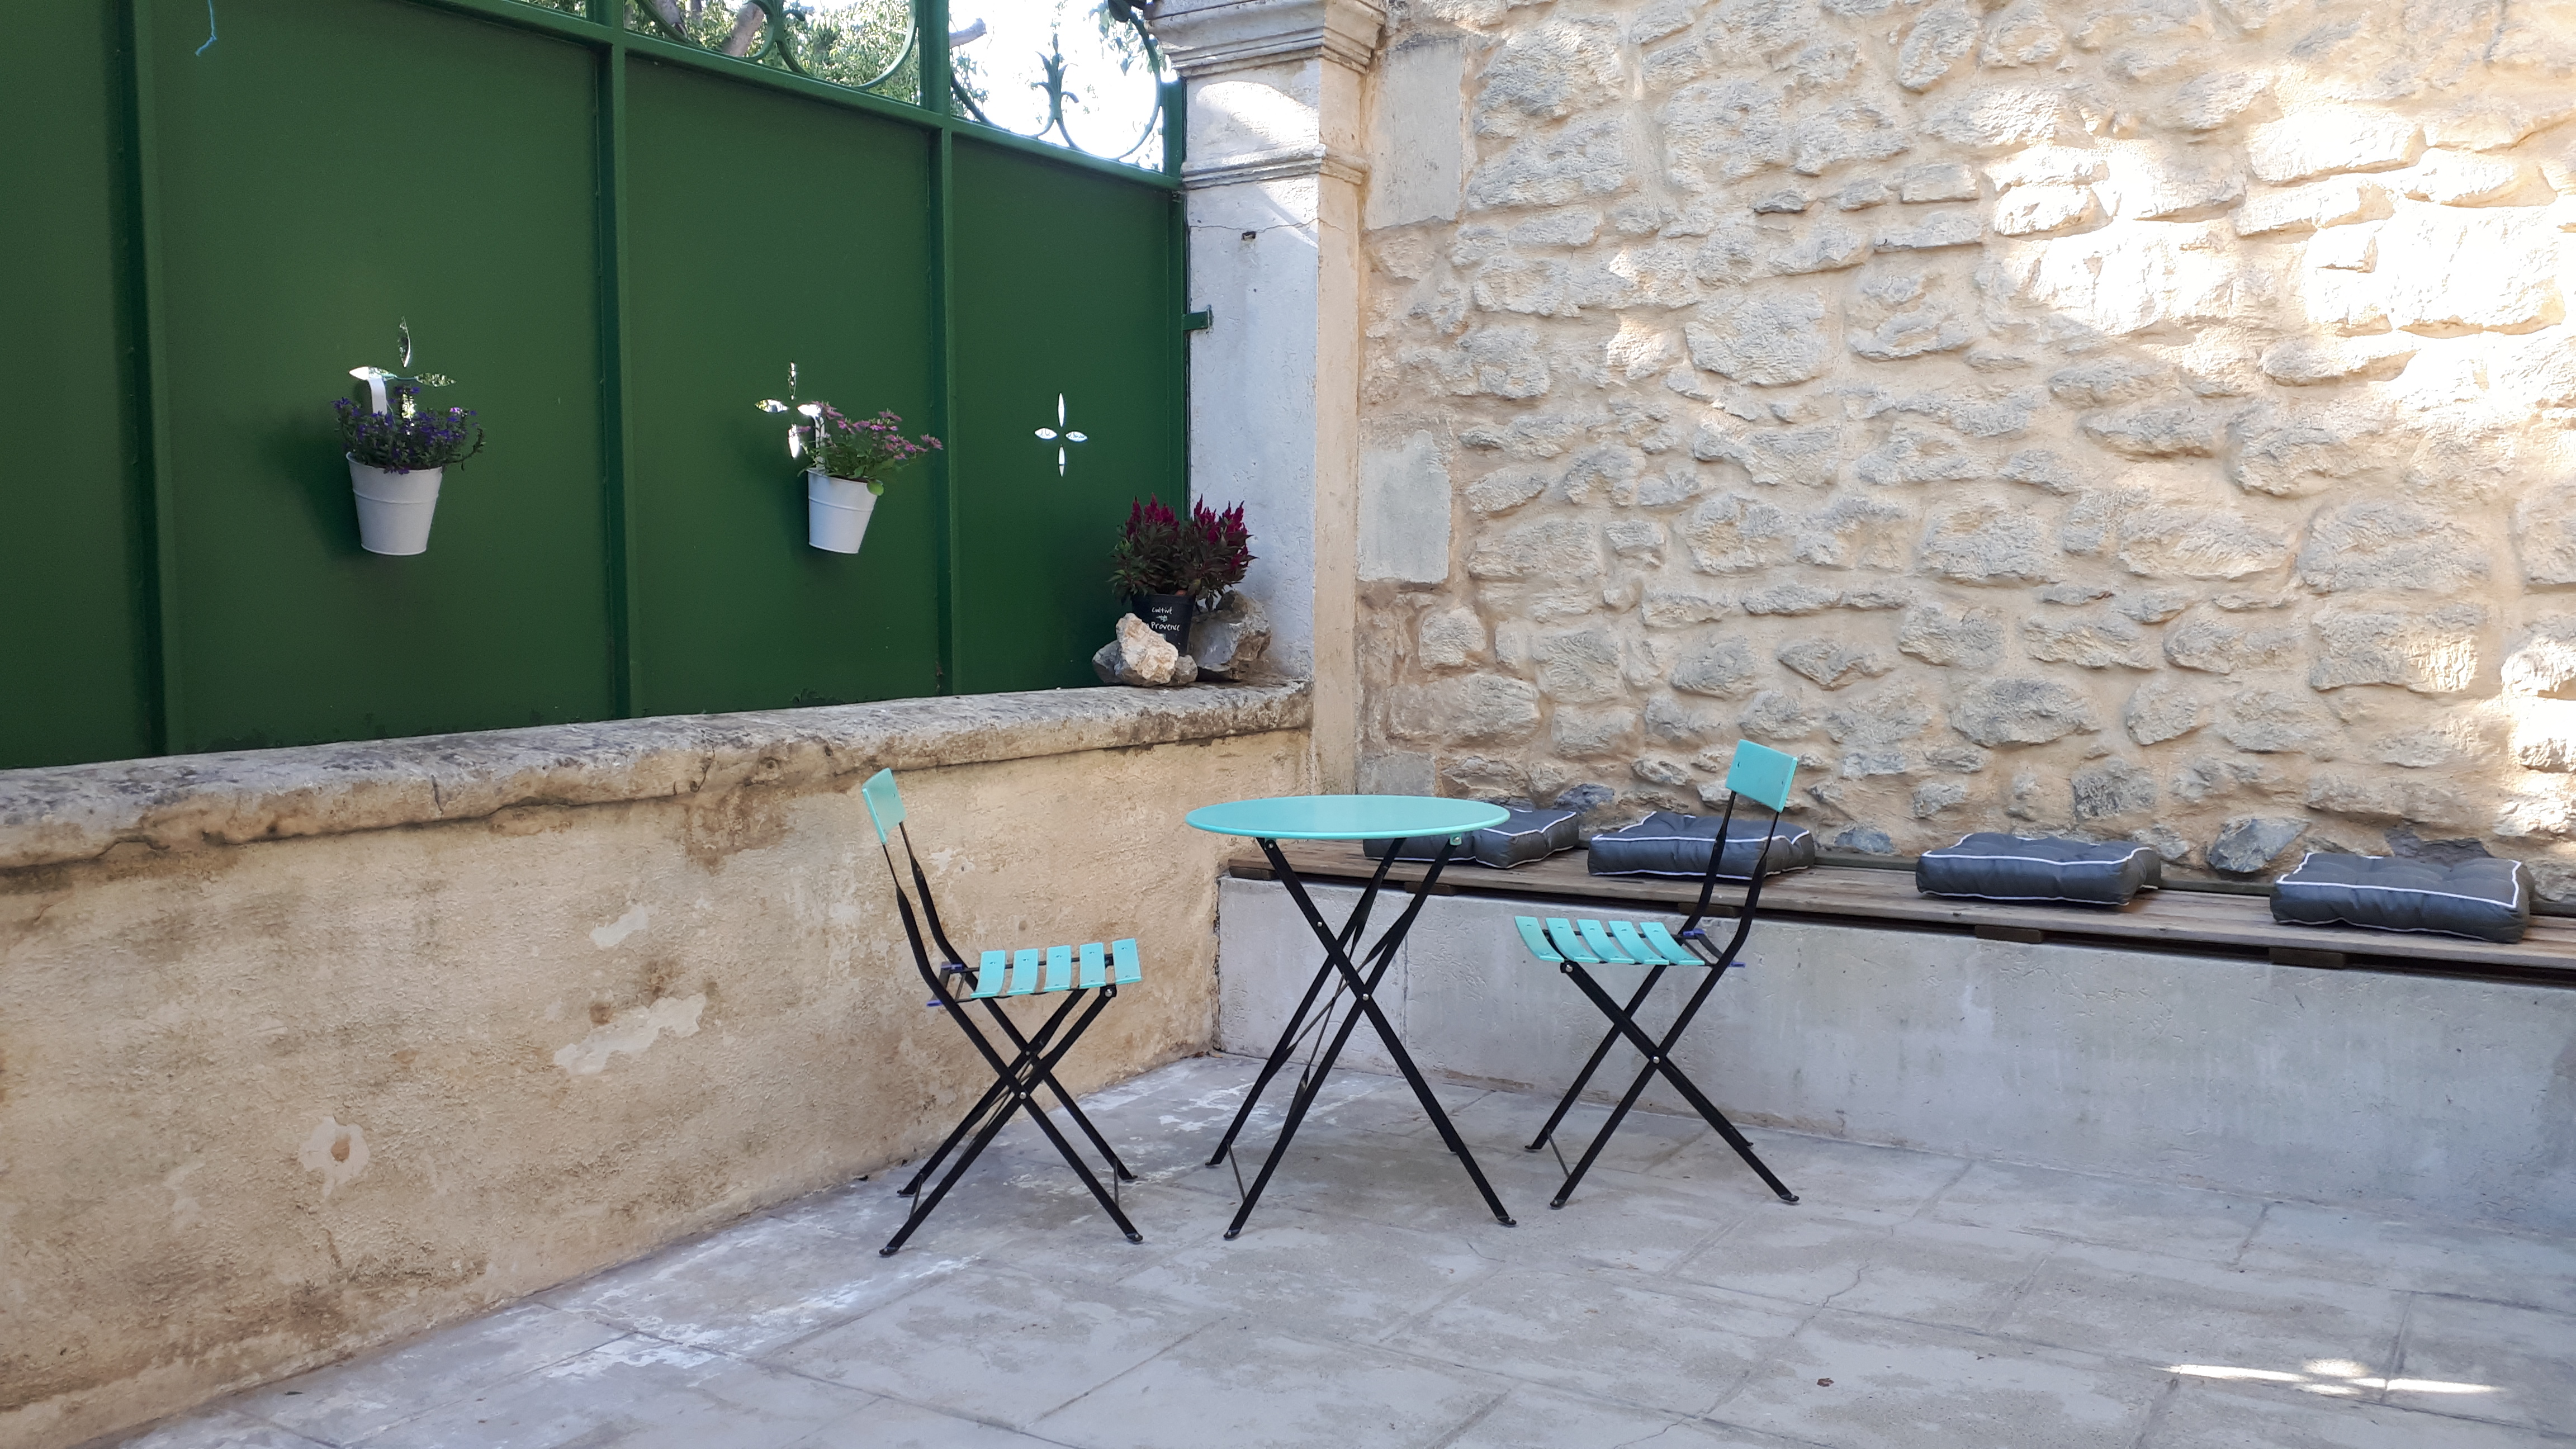 Studio Flat City Centre - Apartments for Rent in Arles, Provence-Alpes-Côte  d'Azur, France - Airbnb